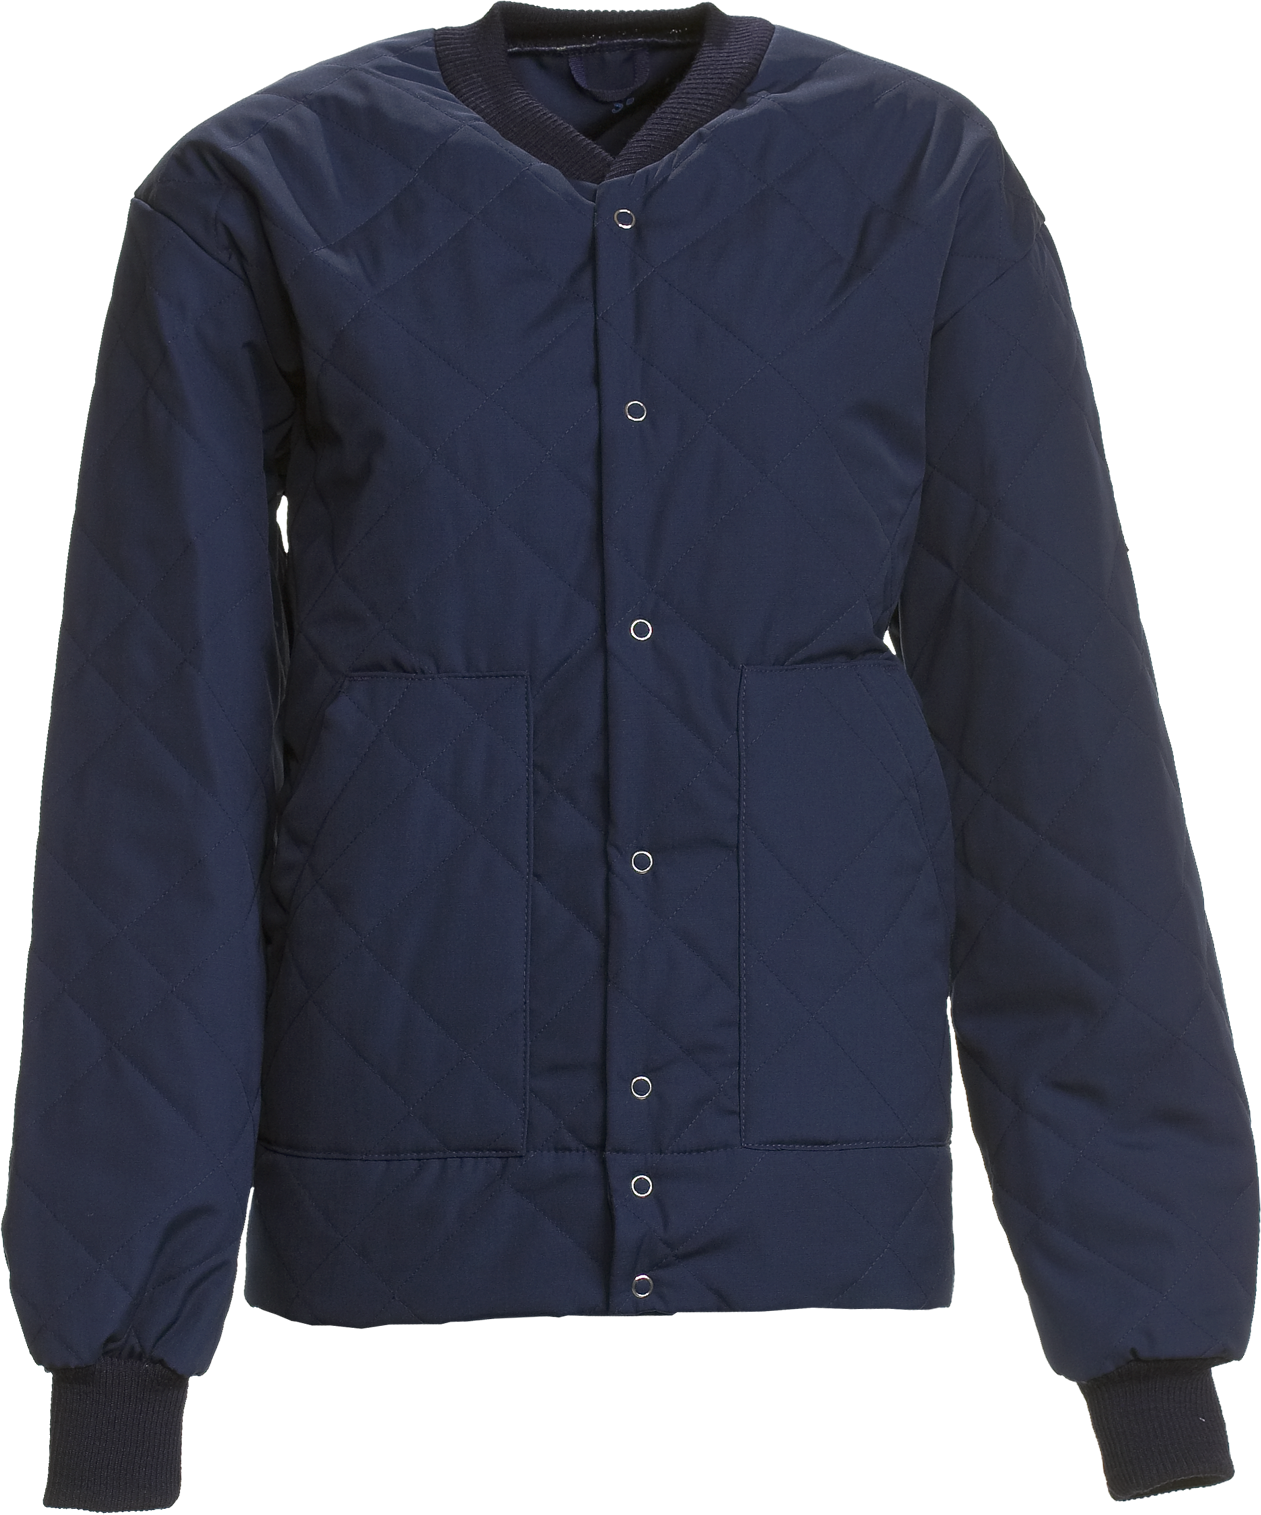 Thermal jacket, Clima Sport (4010001) 